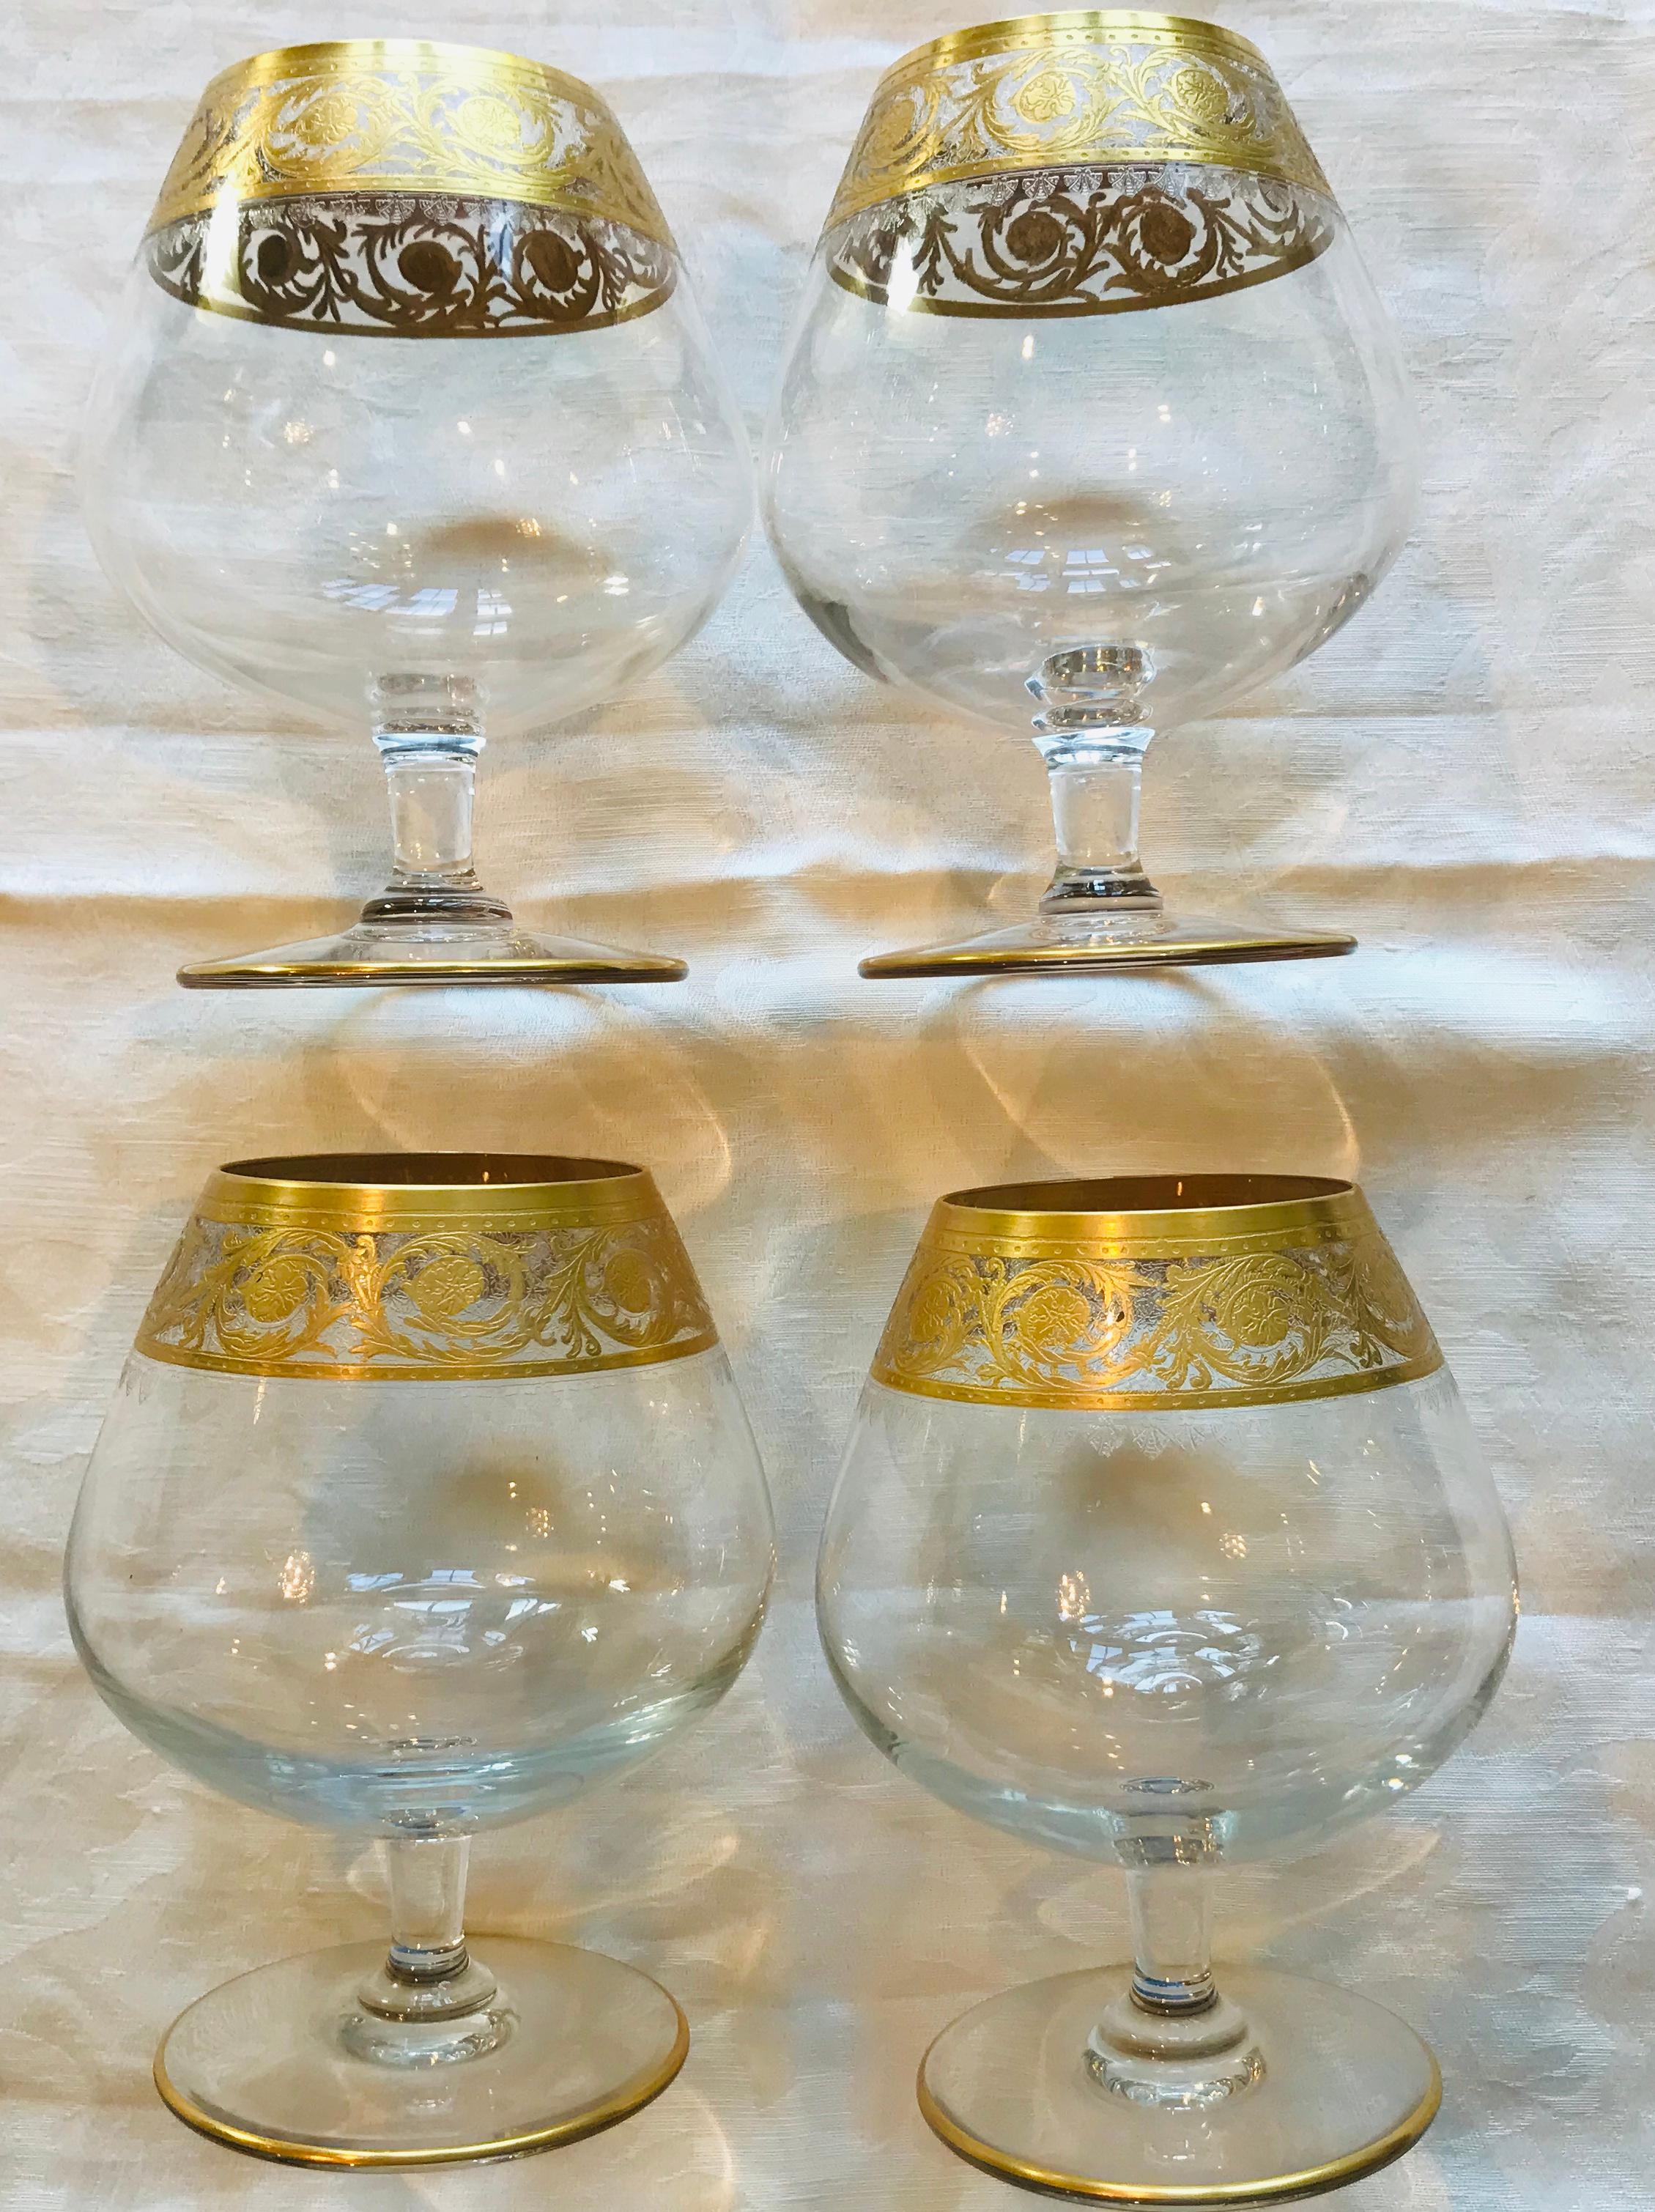 Four gold encrusted snifters from the Saint Louis Gold Thistle collection. 

This pattern is still in production in France, making this set of snifters, produced between 1986 and 1995, a nice addition to your collection (or the starting point for